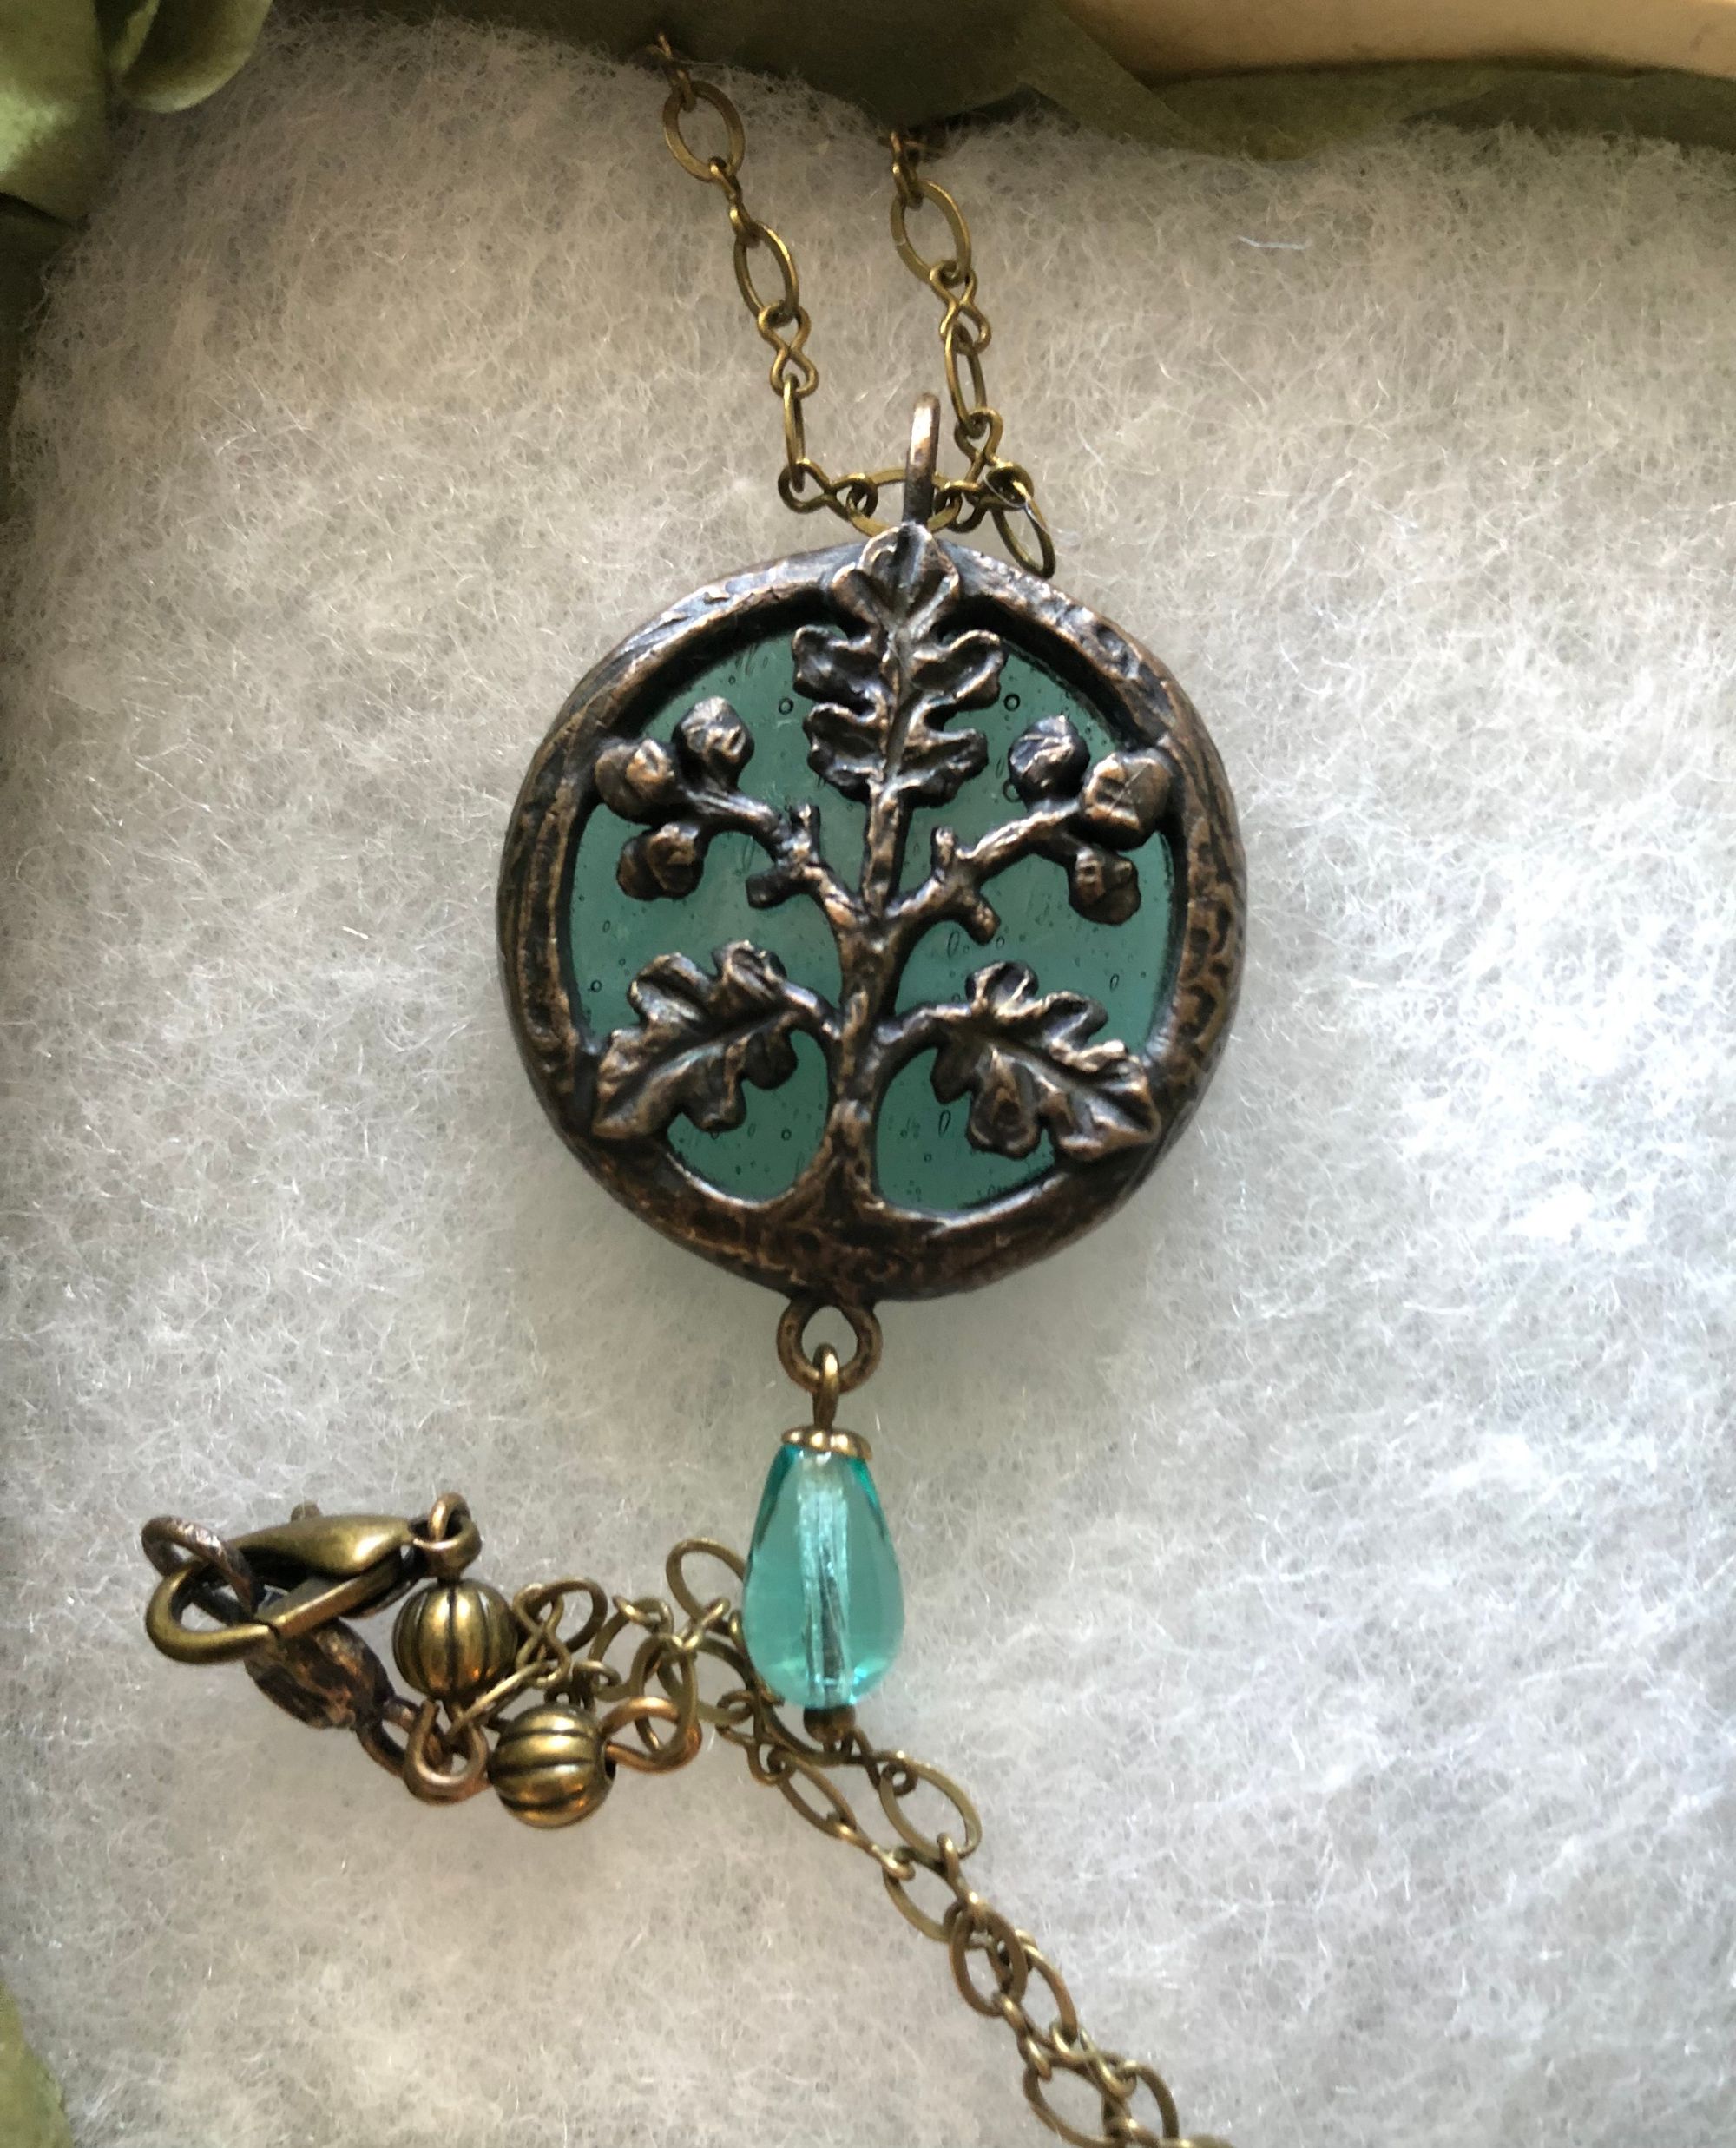 Close-up on a pendant made of antiqued metal encircling turquoise glass, resting in cotton batting. Covered in bronze patina, the circle of the pendant frames a stylized oak branch made of the same metal: three leaves point upwards and to either side, and between them grow two clusters of acorns. This figure is set over the turquoise glass. There's a turquoise glass bead dangling from the bottom of the pendant, and a bronze-coloured chain is visible above and below it as it lies flat.